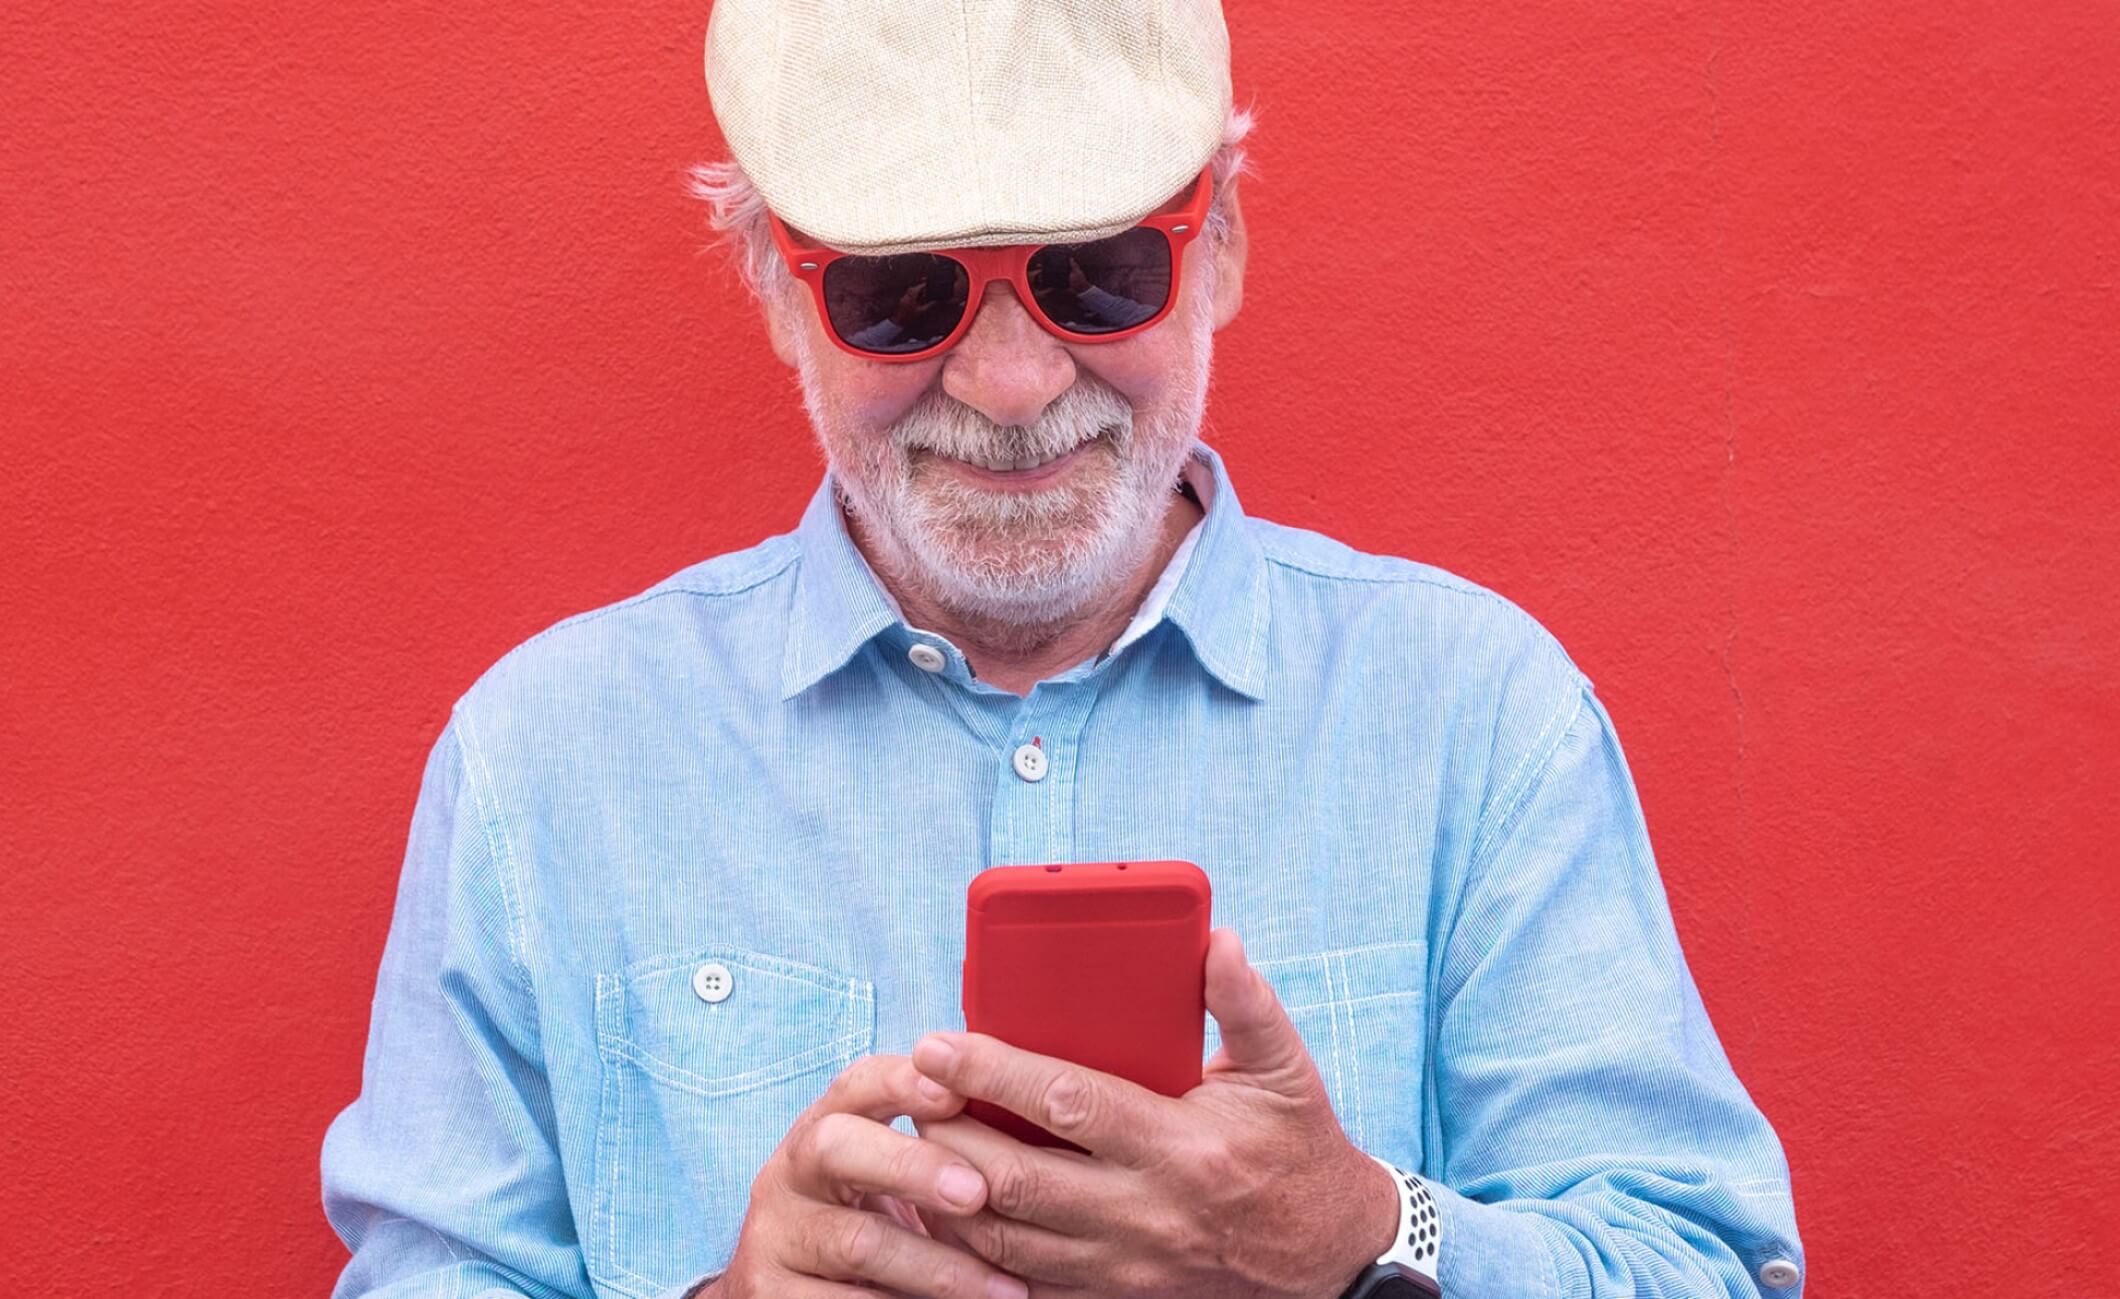 older man looking at smartphone with a red background and wearing sunglasses